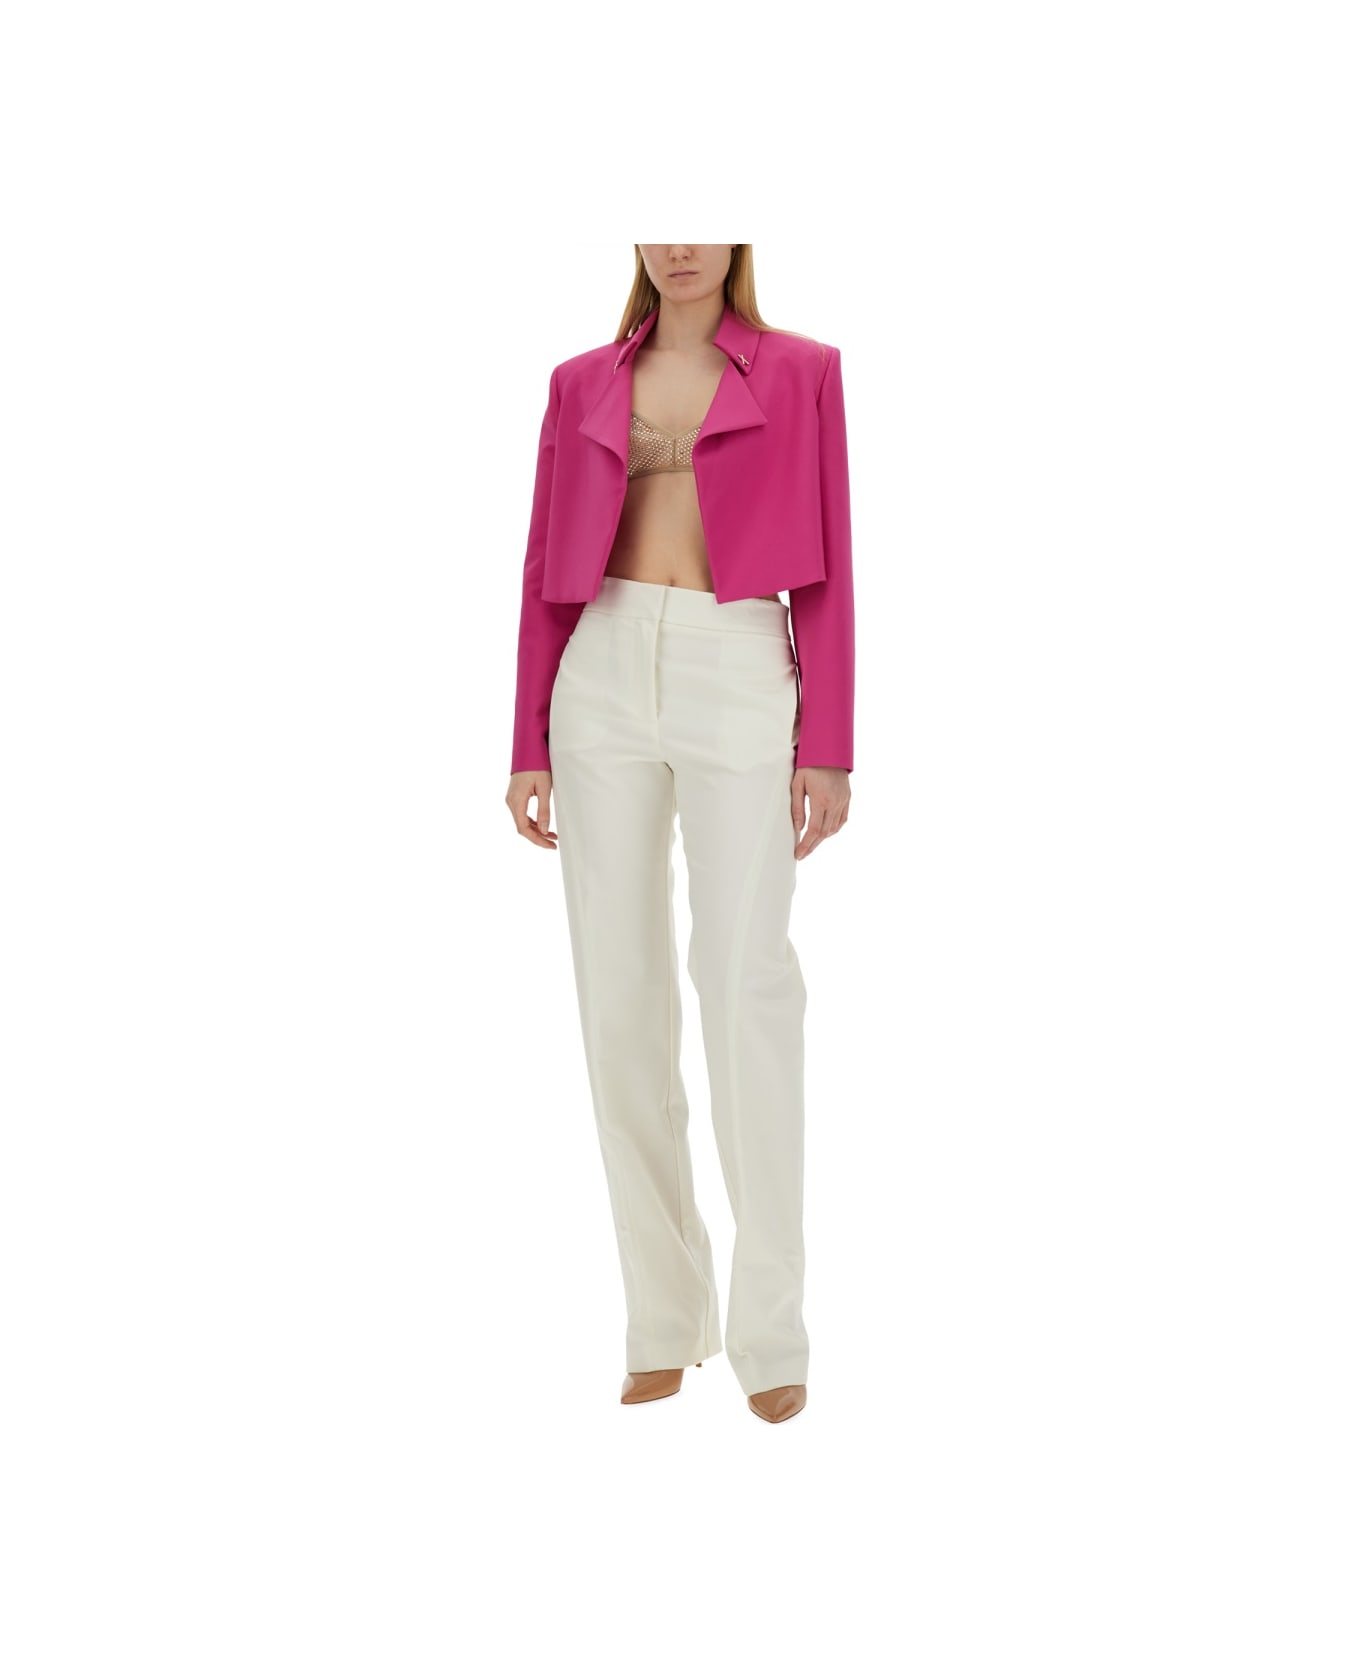 Genny Top In Network. - Pink